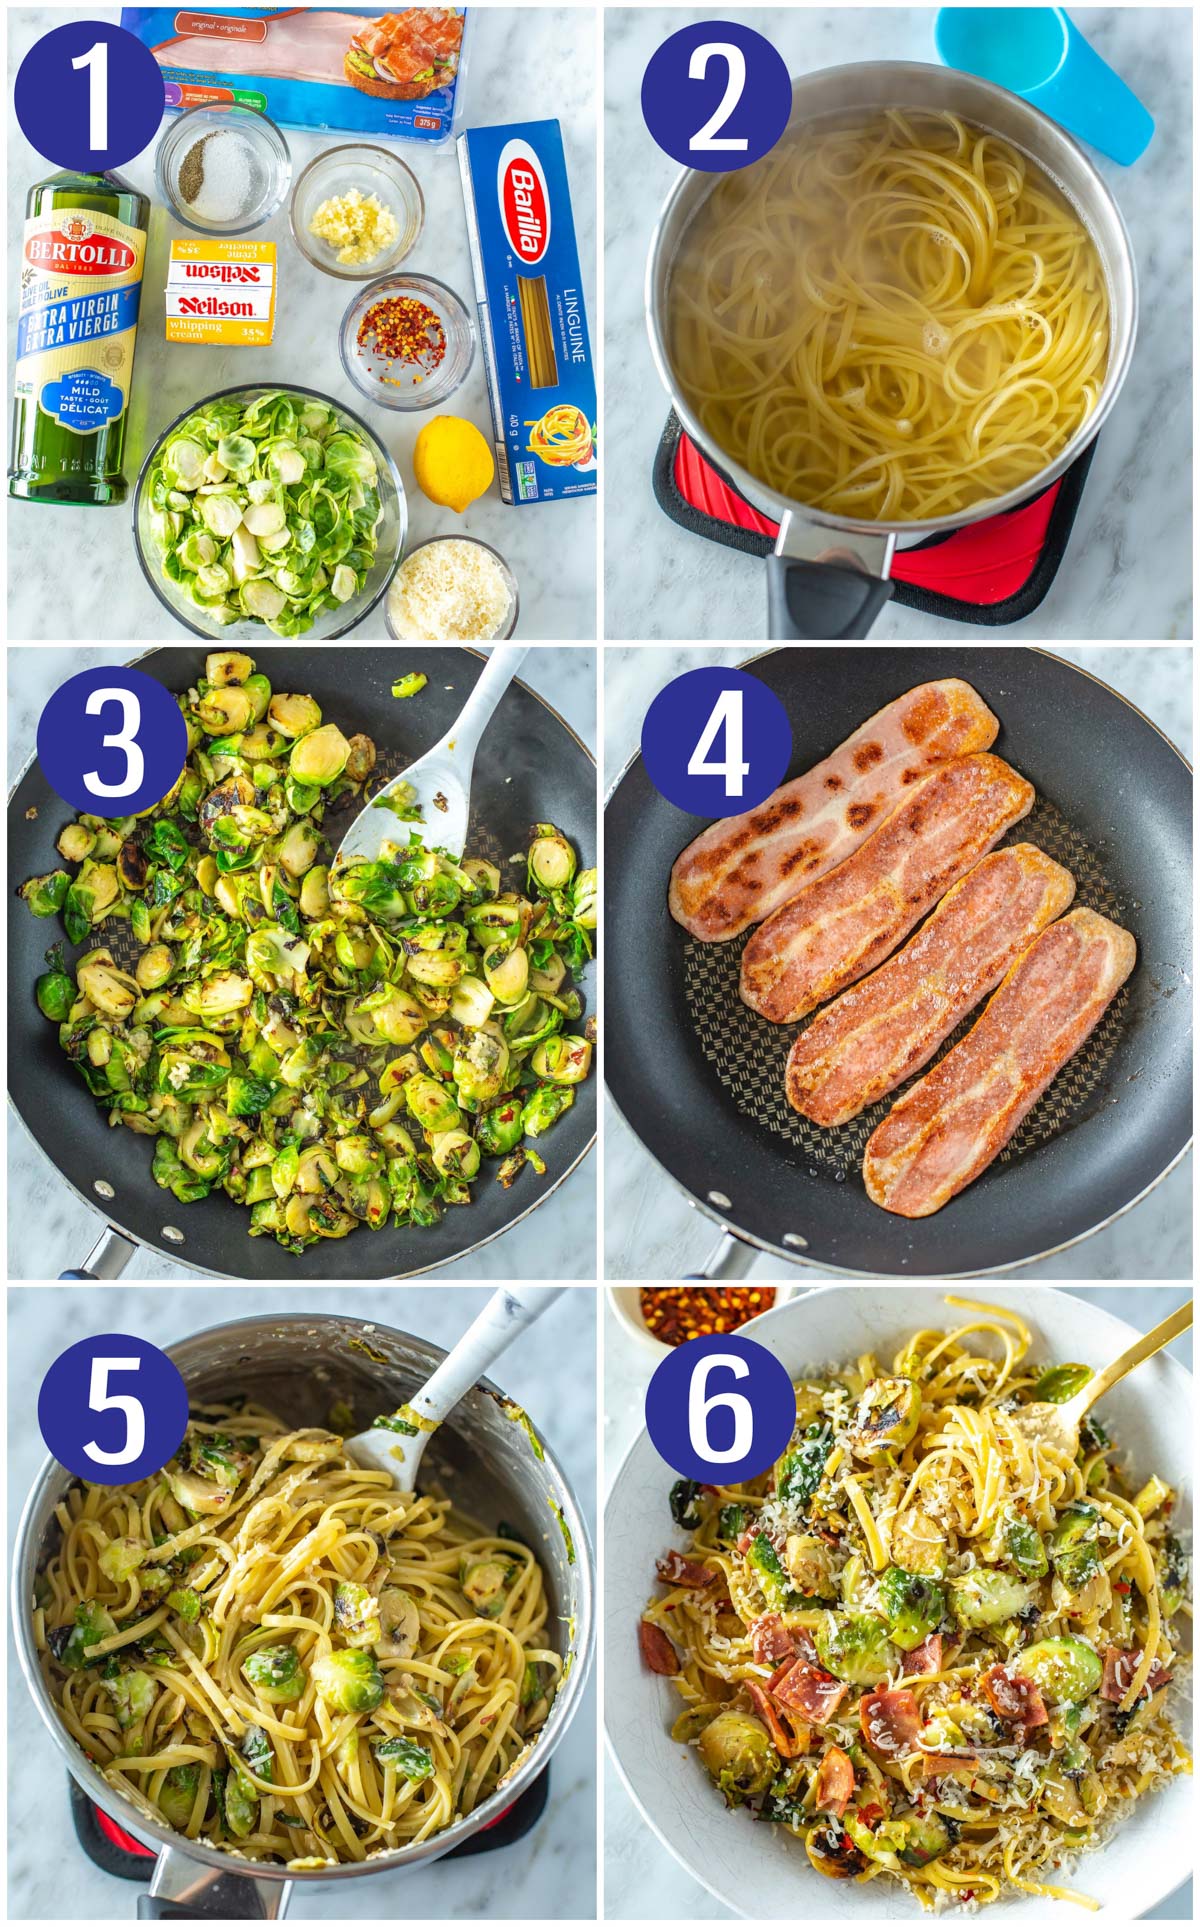 Step-by-step instructions collage for making creamy brussels sprouts pasta: assemble ingredients, cook pasta, cook brussels sprouts, cook bacon, toss everything together, garnish with parmesan cheese and chili flakes.